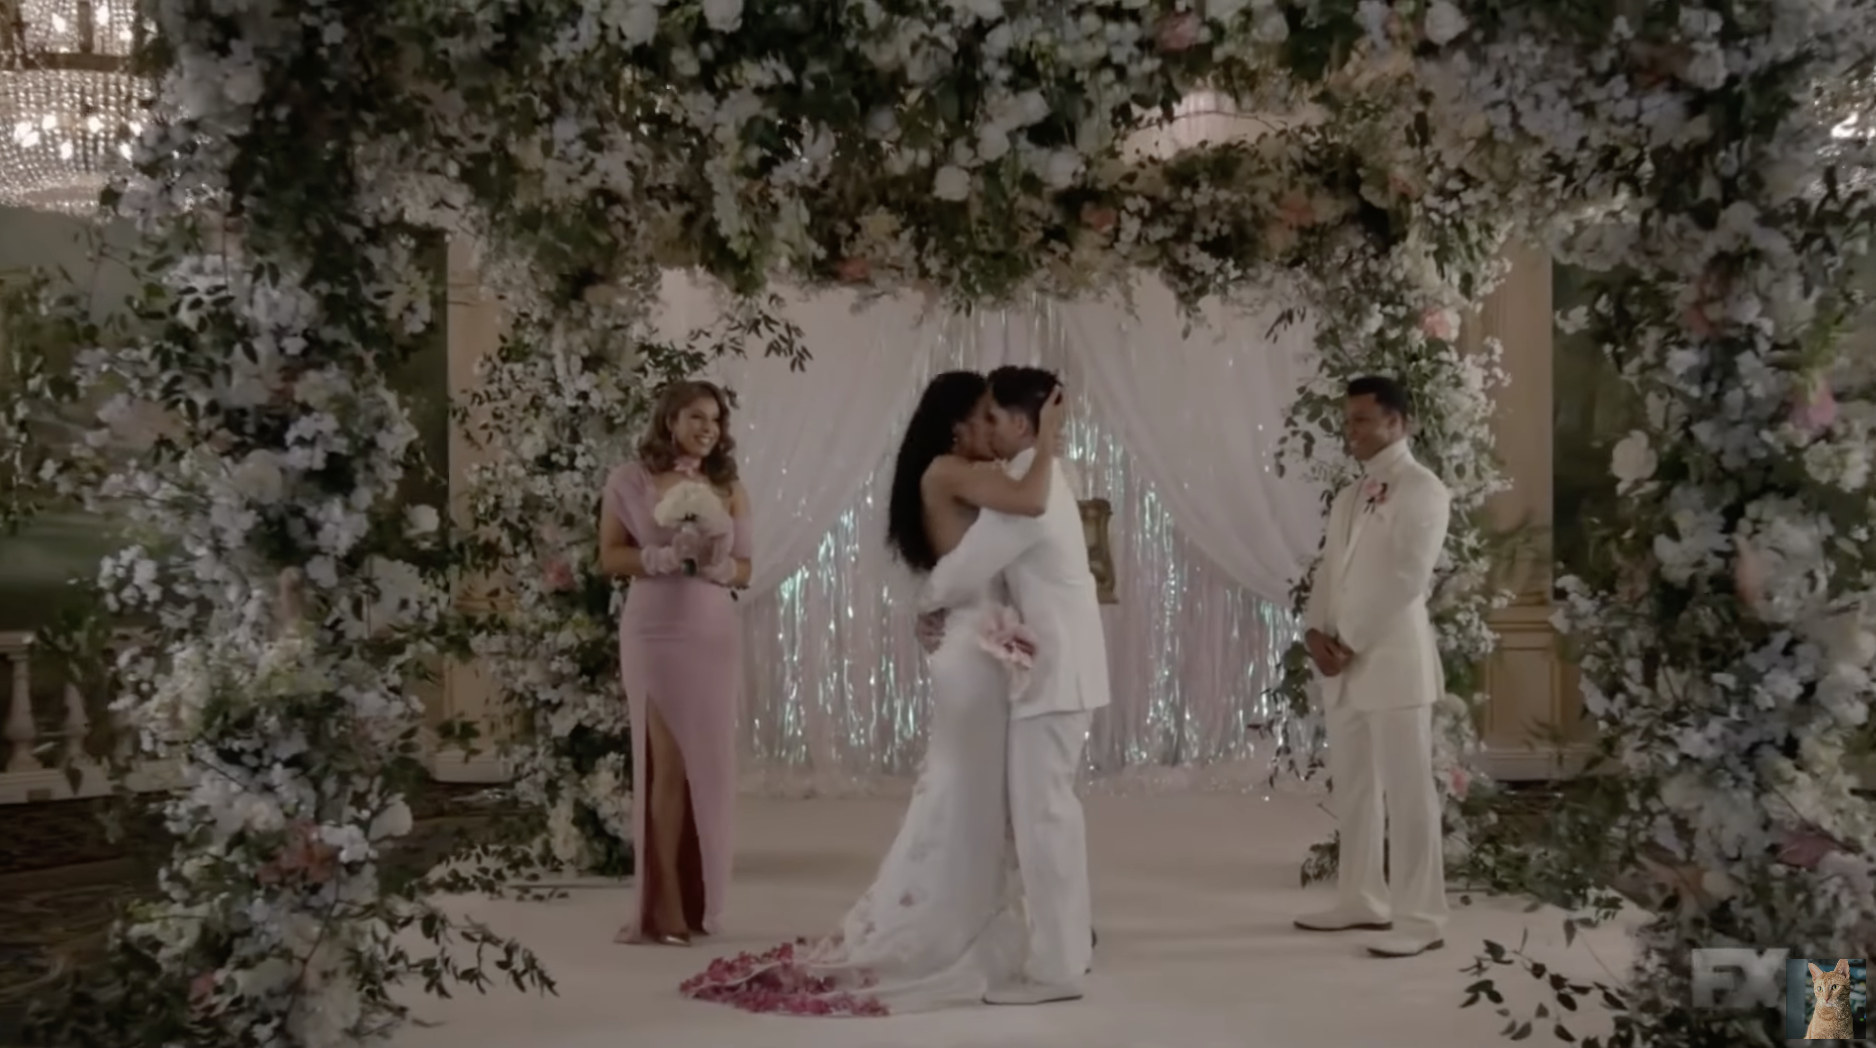 A couple wearing white stands at the altar embraced in a passionate kiss, under a huge flowering arch, as a bridesmaid in pink and a groomsman in a cream suit stand beside them